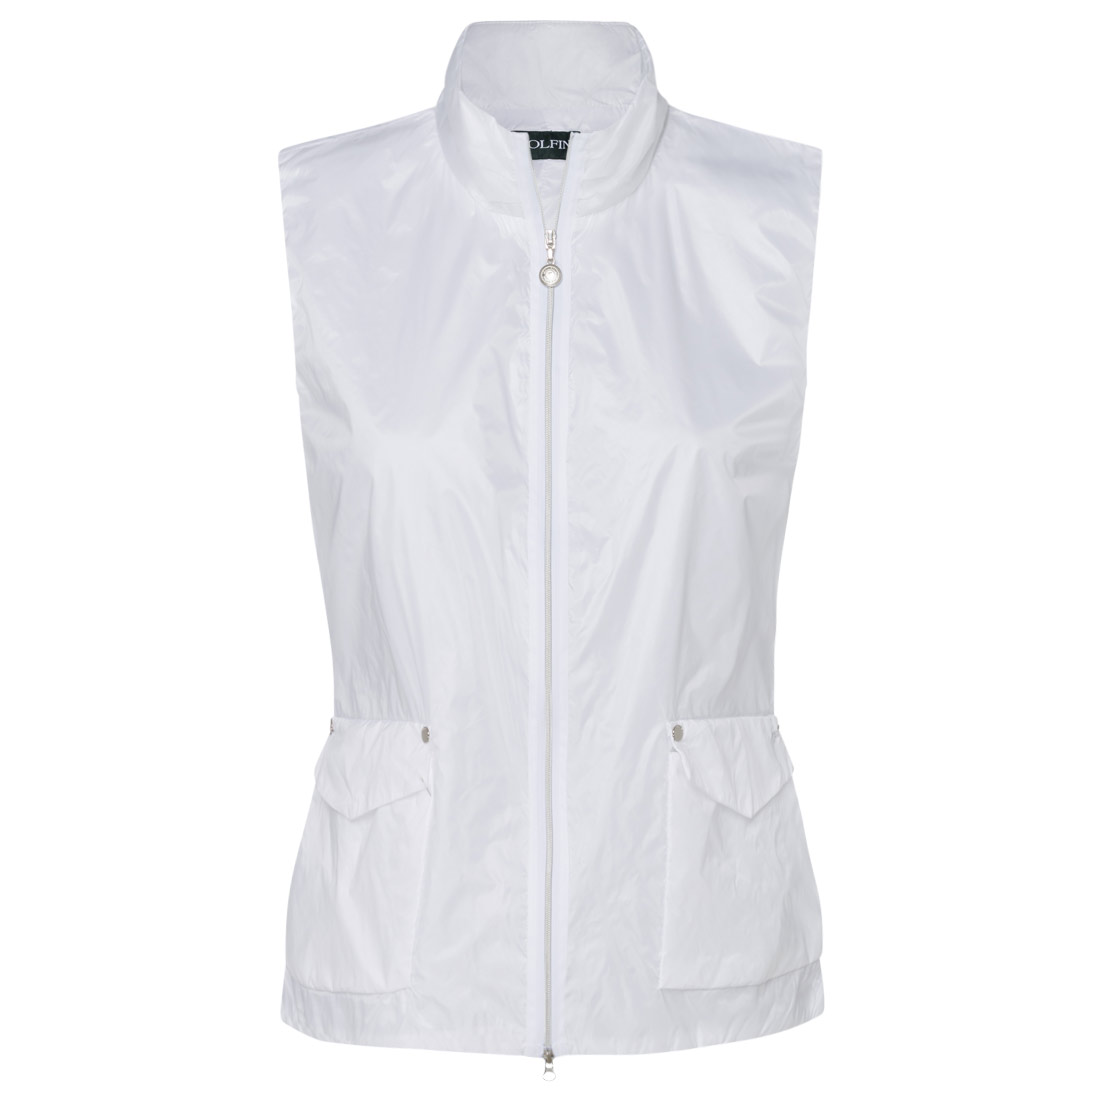 Ladies' gilet with wind protection function and slight gloss